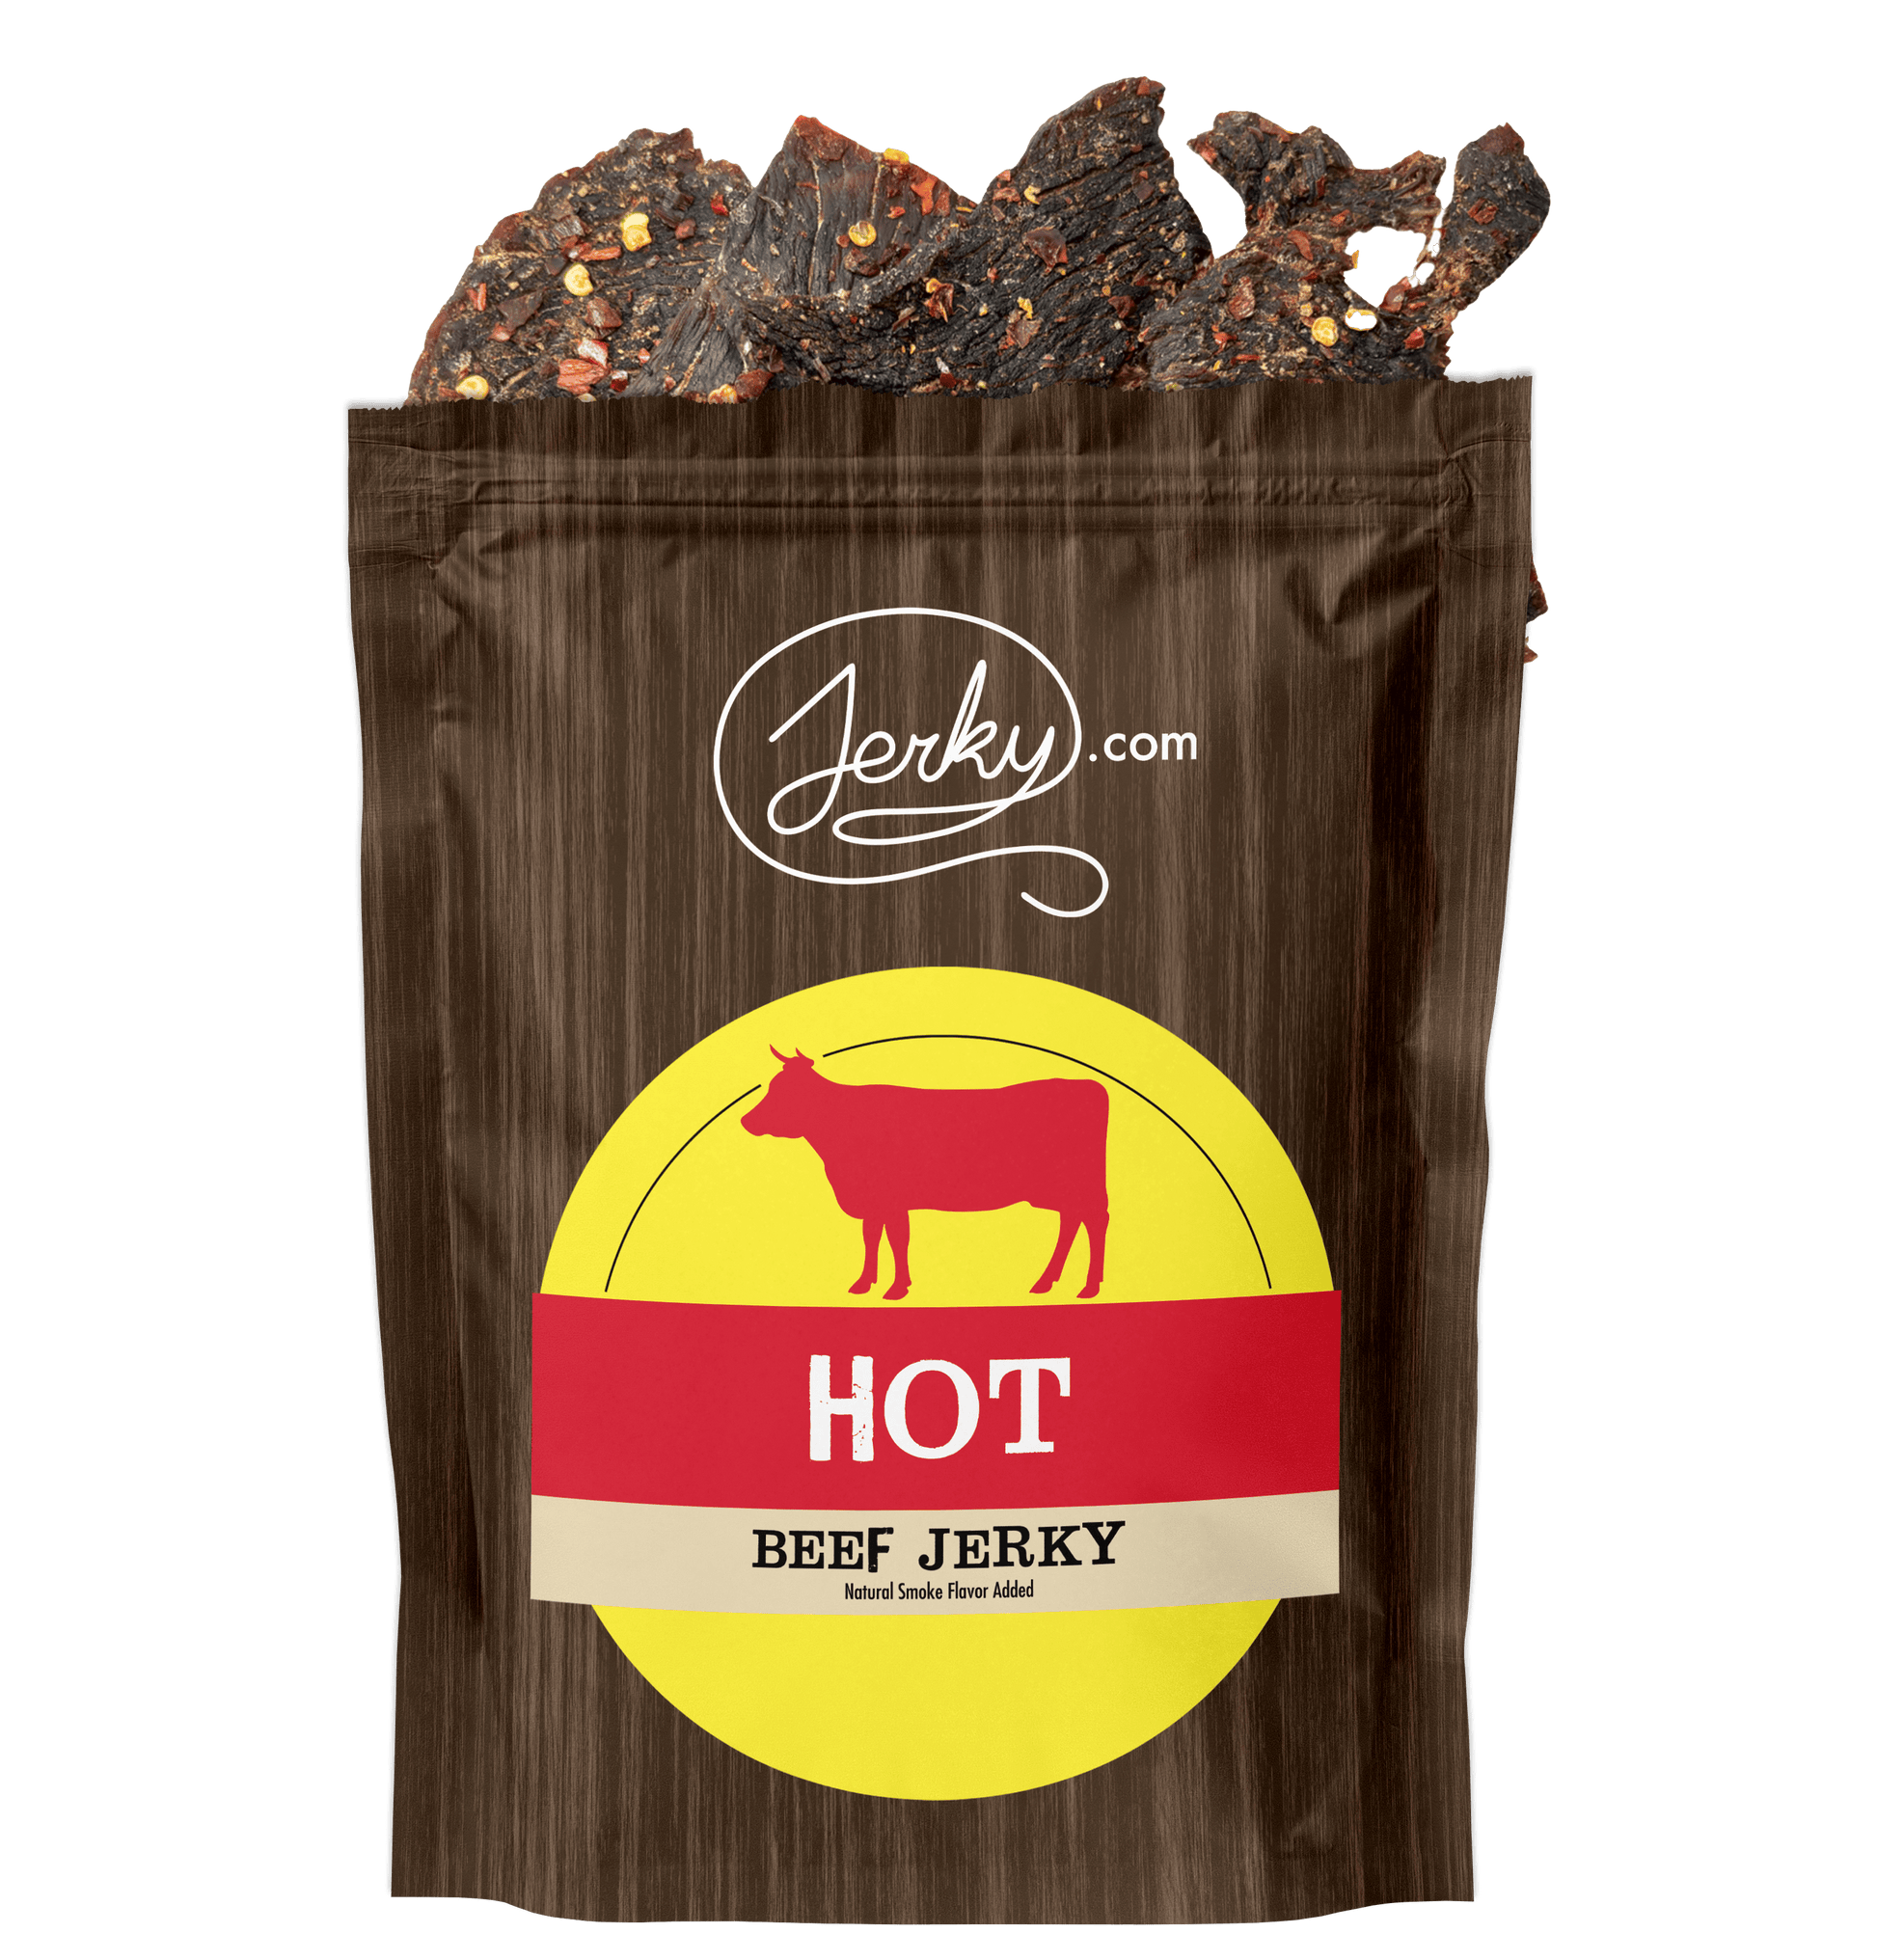 All-Natural Beef Jerky - Hot by Jerky.com